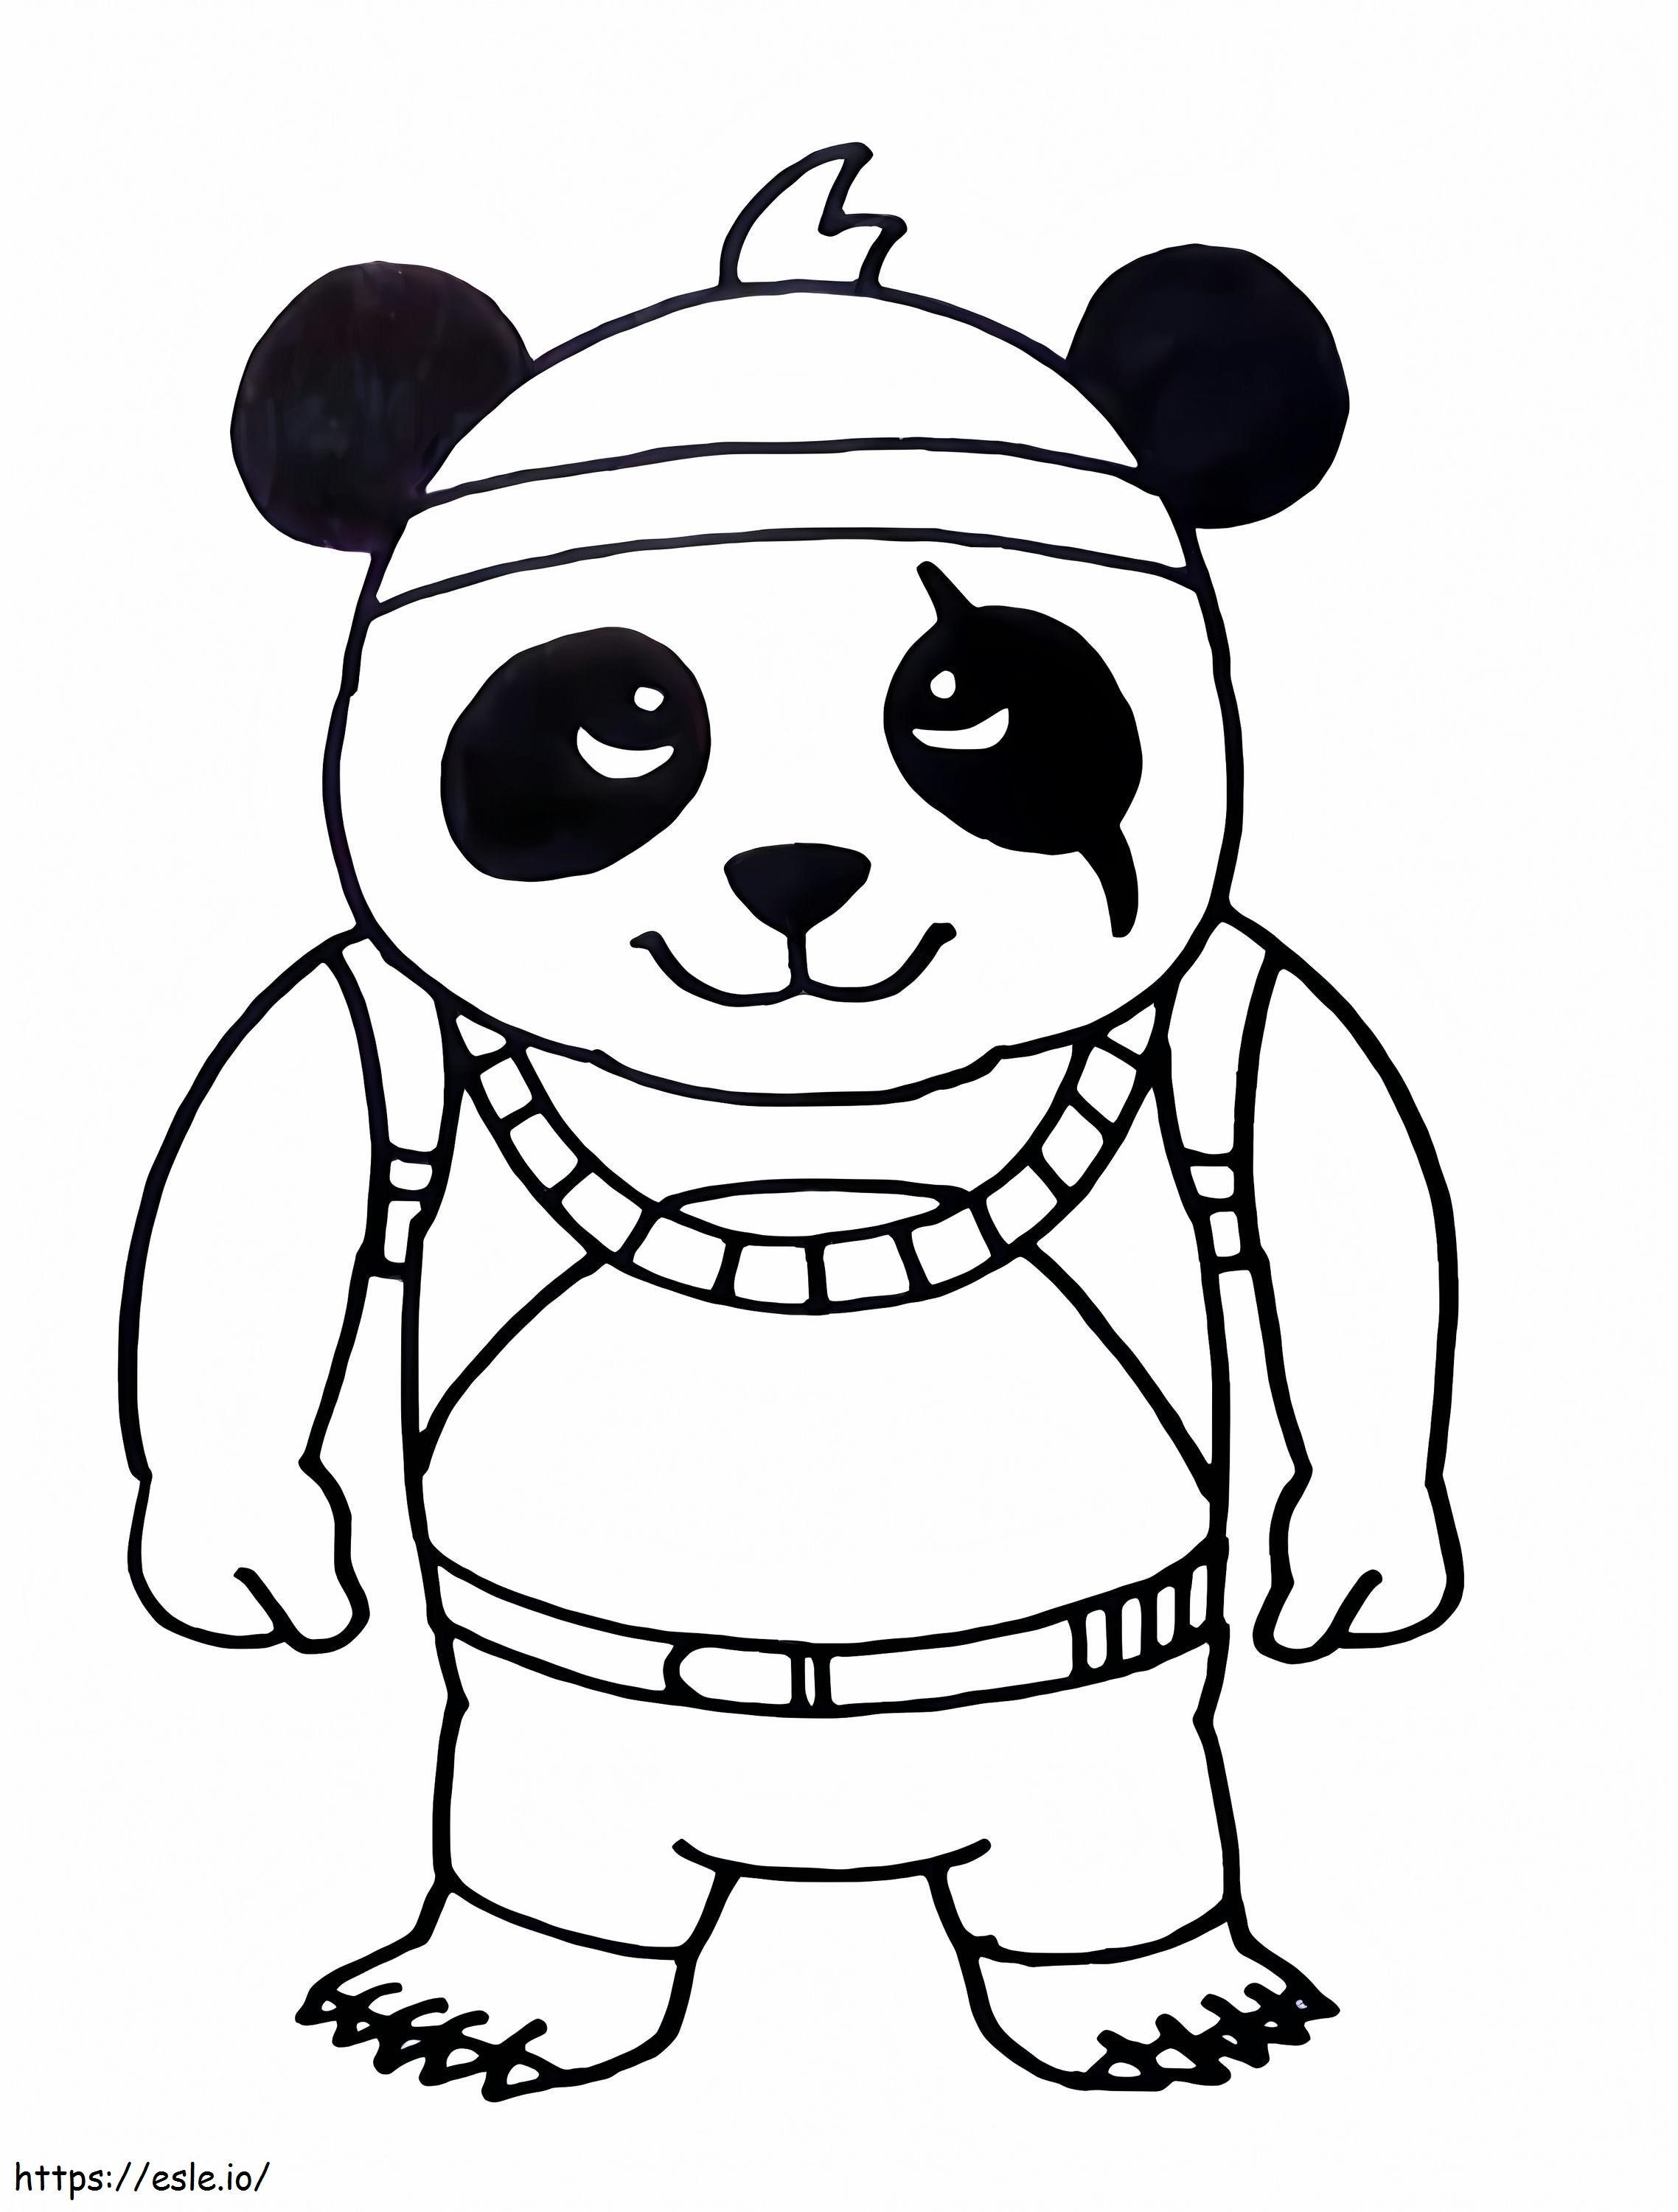 Detective Panda Free Fire coloring page